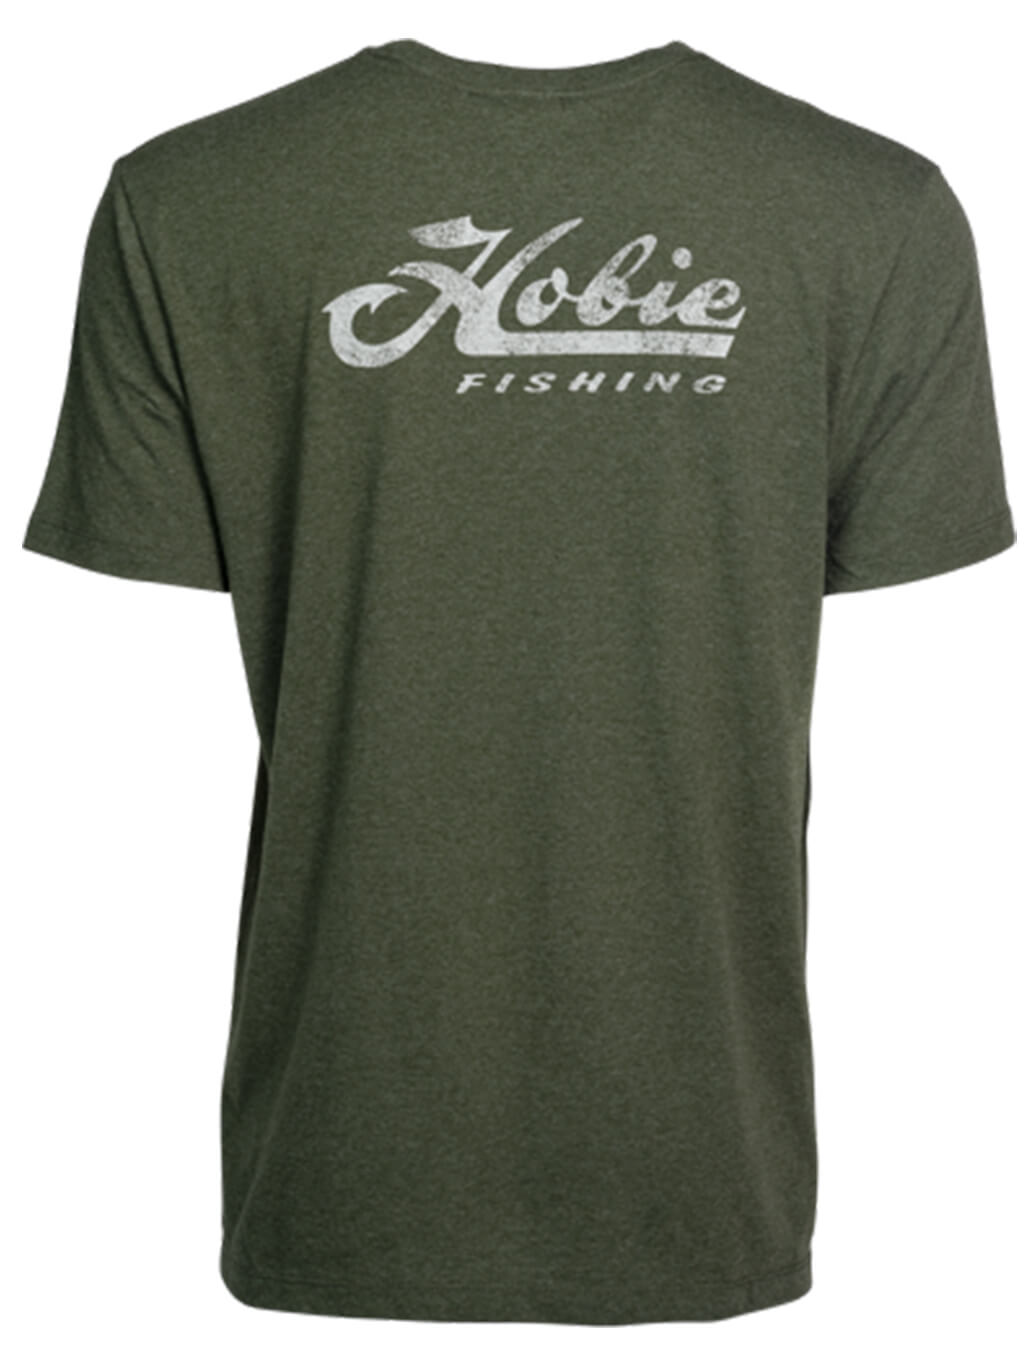 Hobie Fishing Product Hooked Tee Forest Heather Back